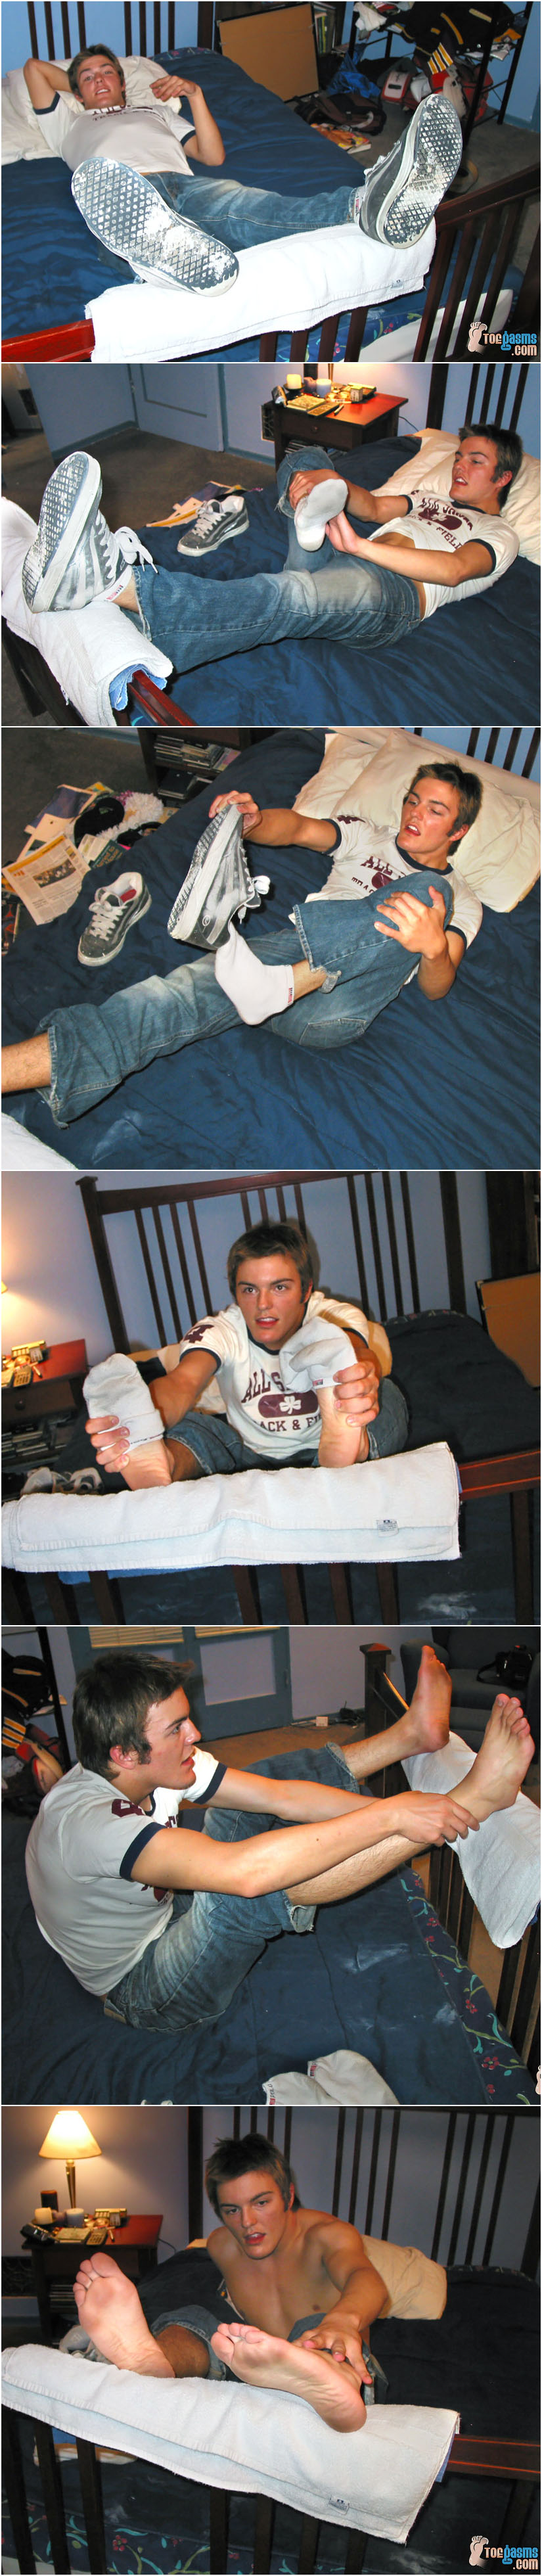 Cute amateur college guy shows off his feet